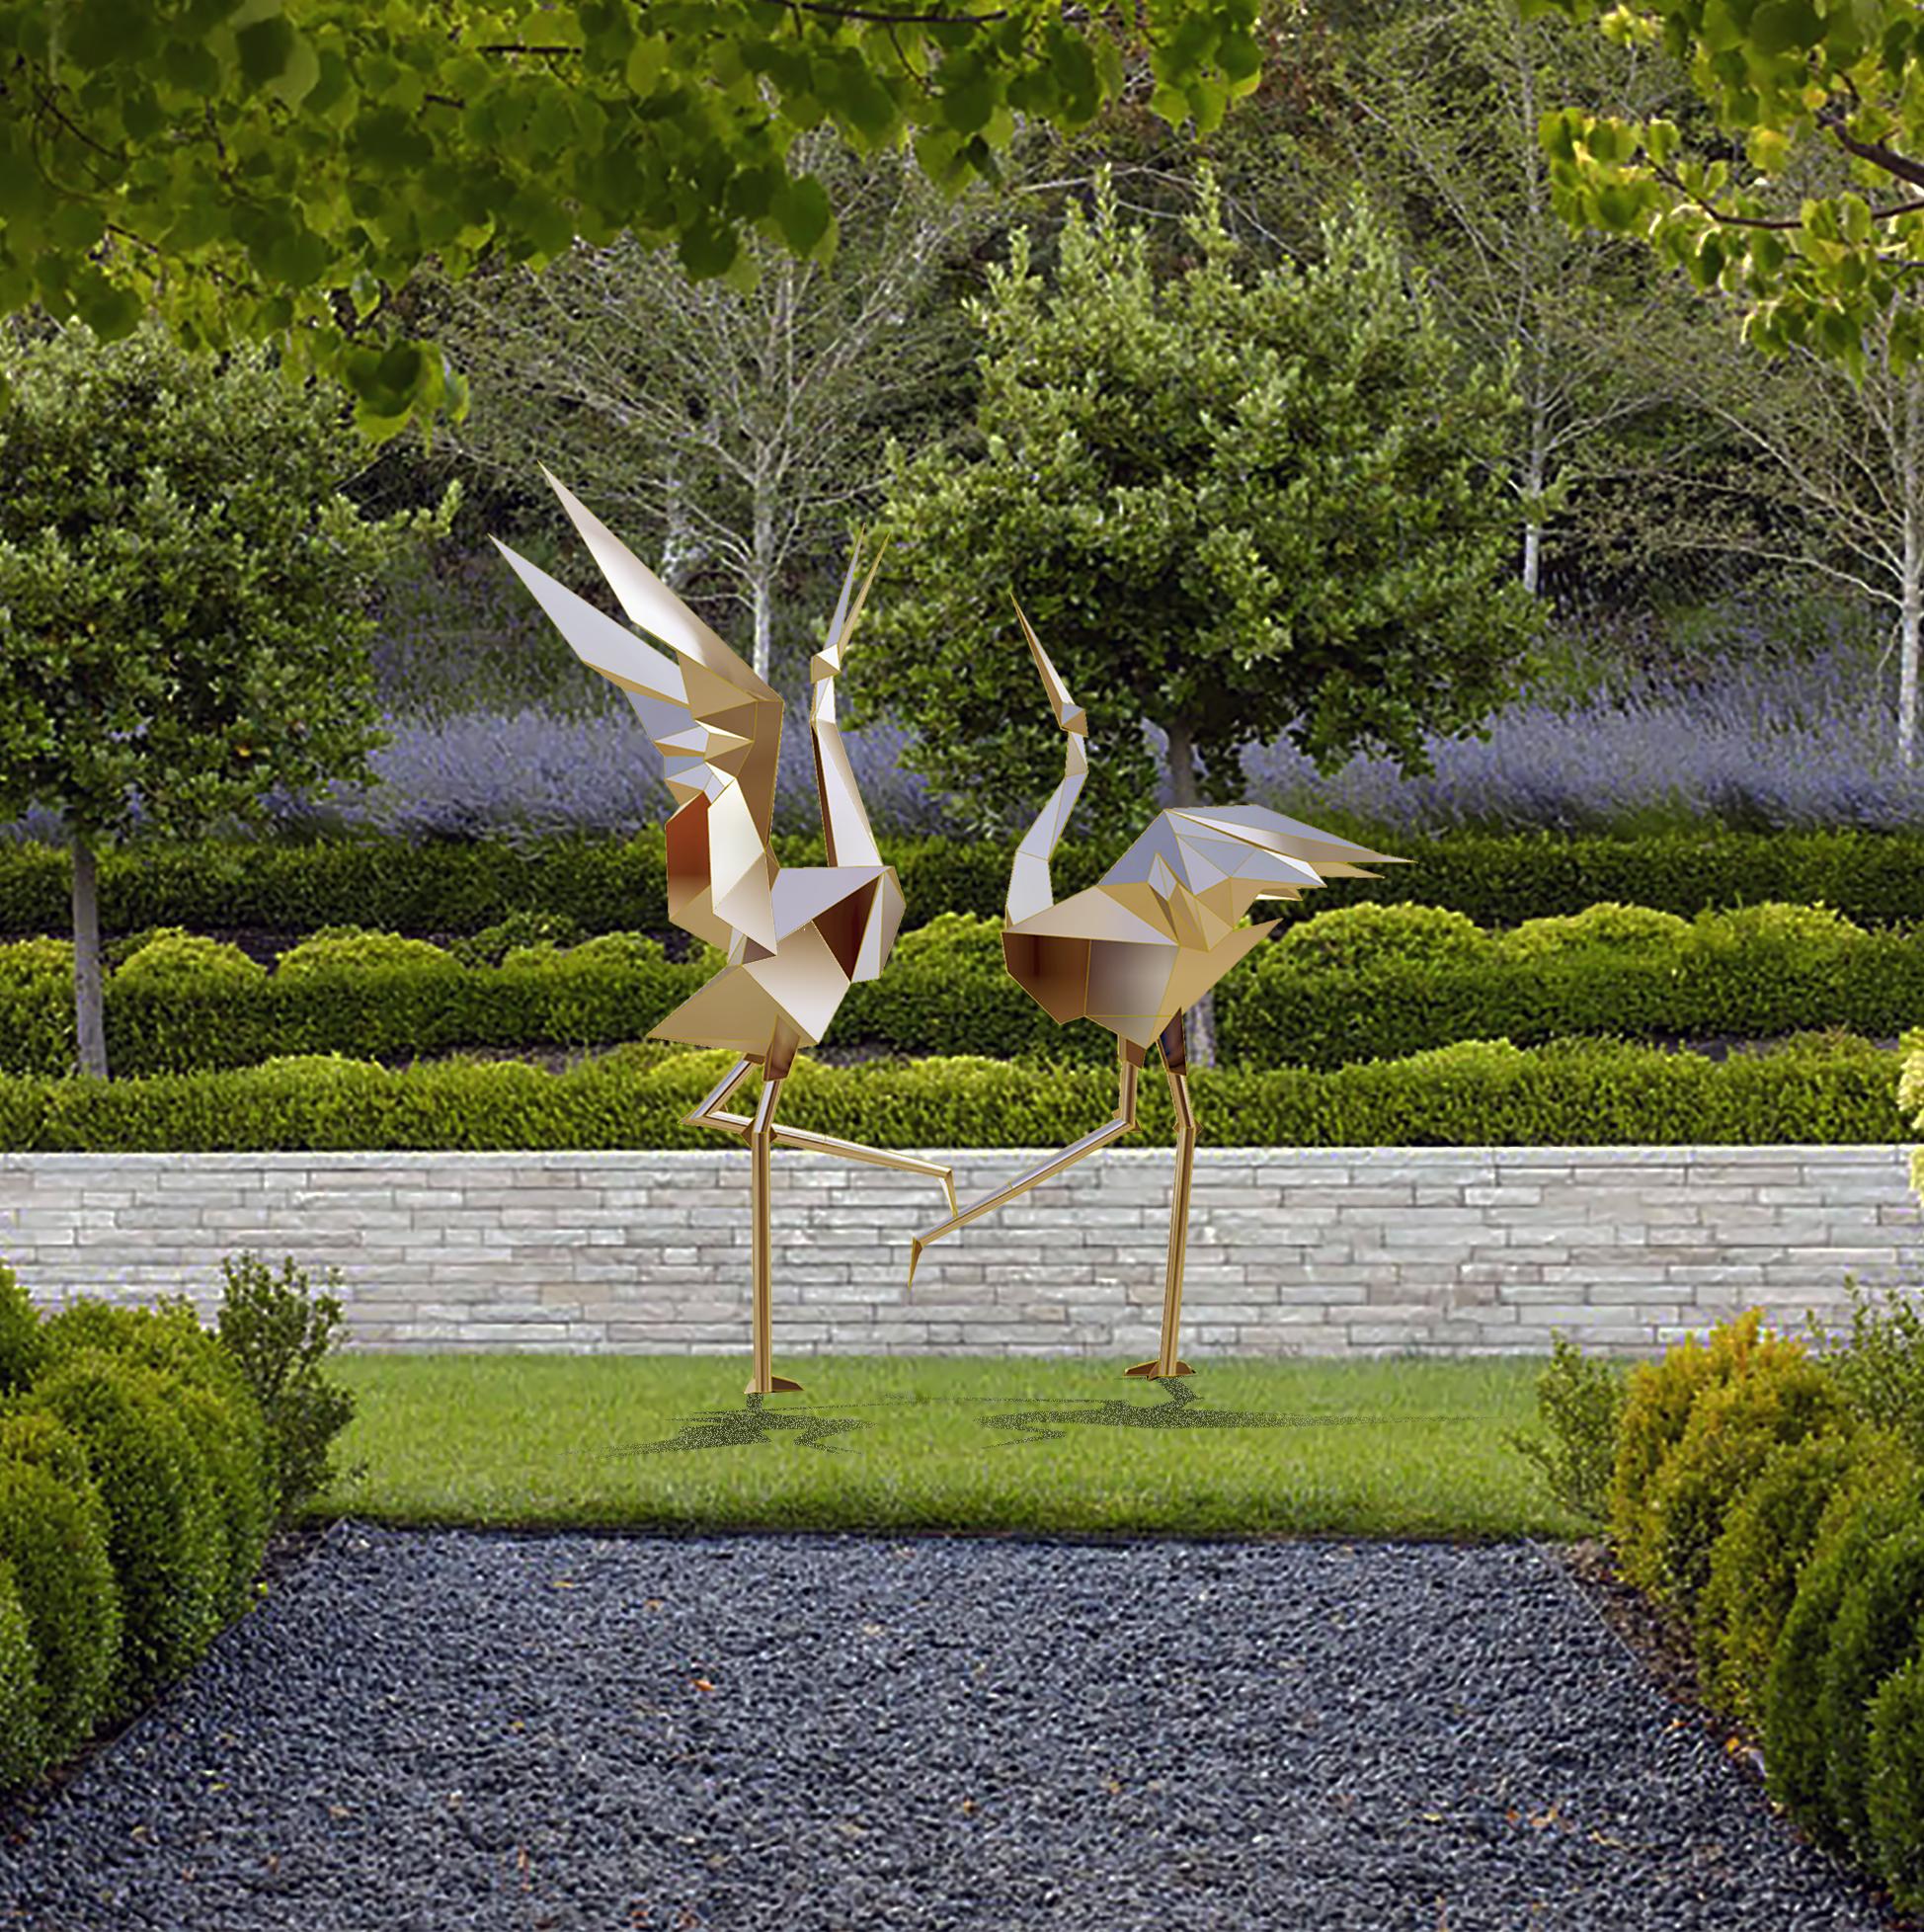 This sculpture of a pair of Dancing Cranes by Lyle London explores a unique translation of the Japanese art of folded paper  into a metal sculpture.  The piece is based on the Japanese Red Cap dancing crane which are one of the largest cranes in the